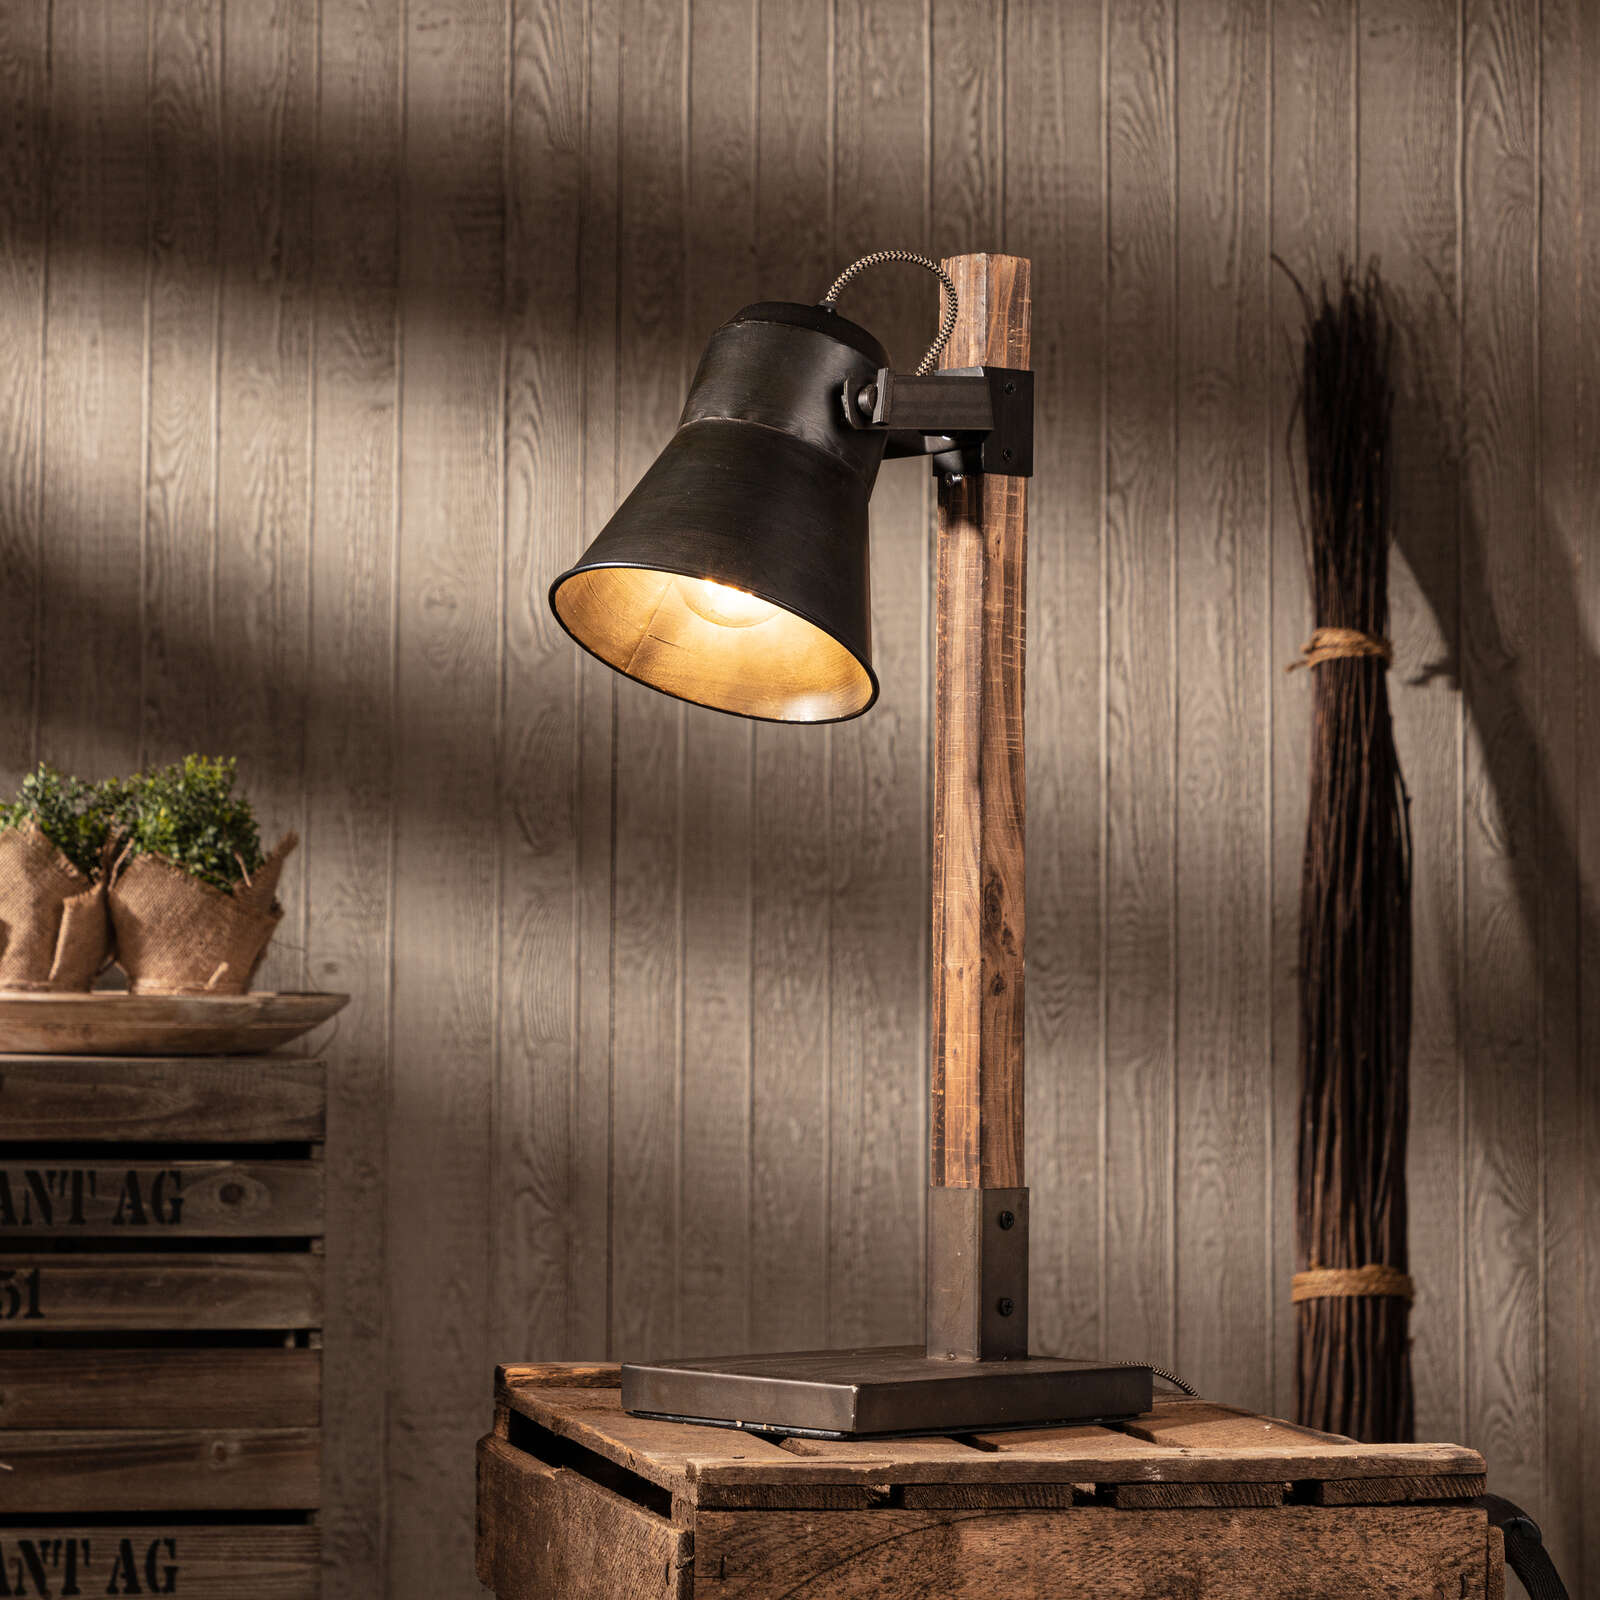             Wooden table lamp - Maria 3 - Brown
        